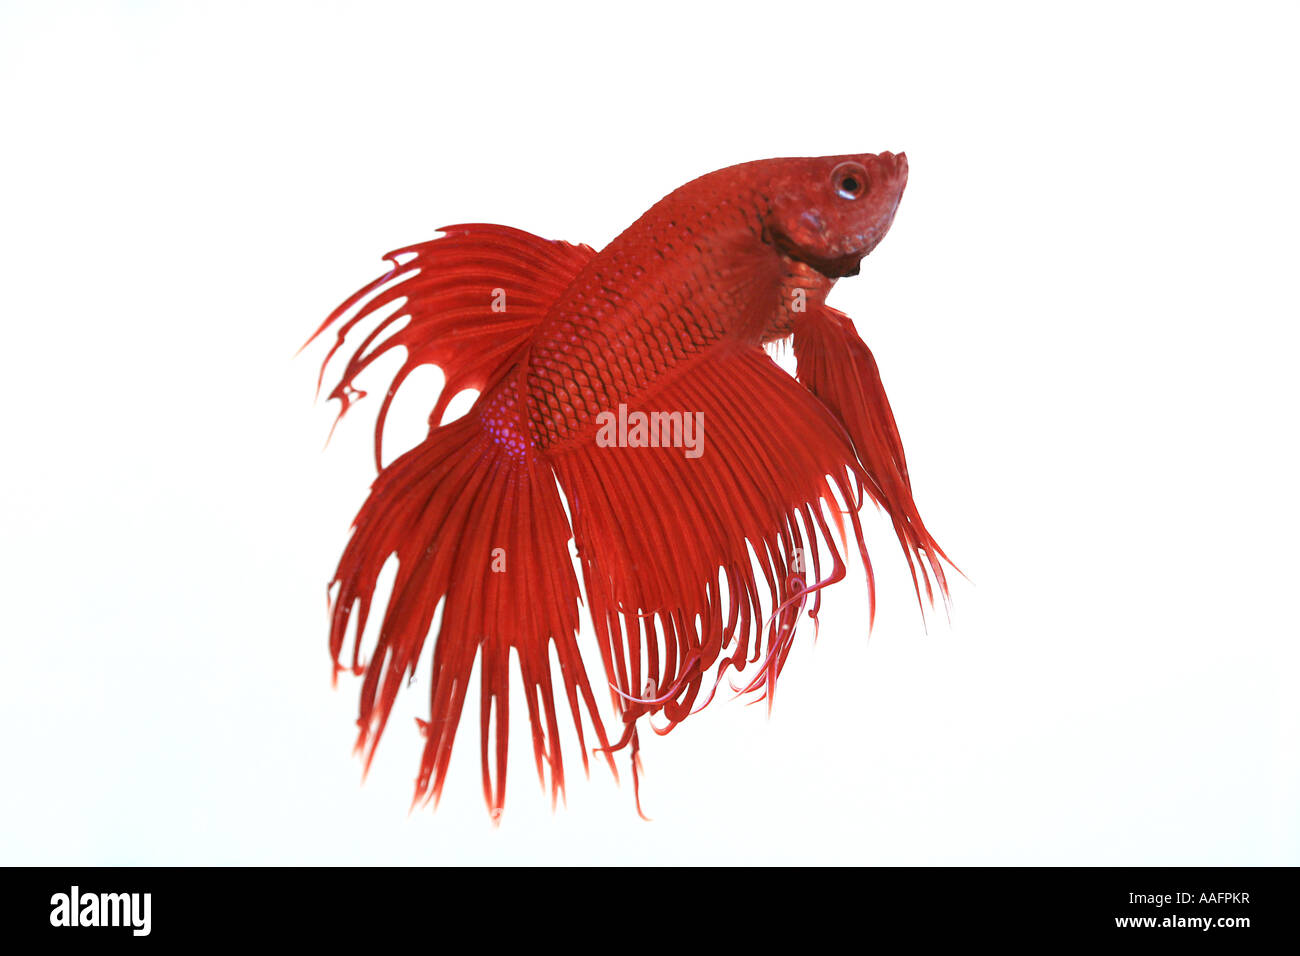 Blood red Crowntail Betta Splendons Stock Photo